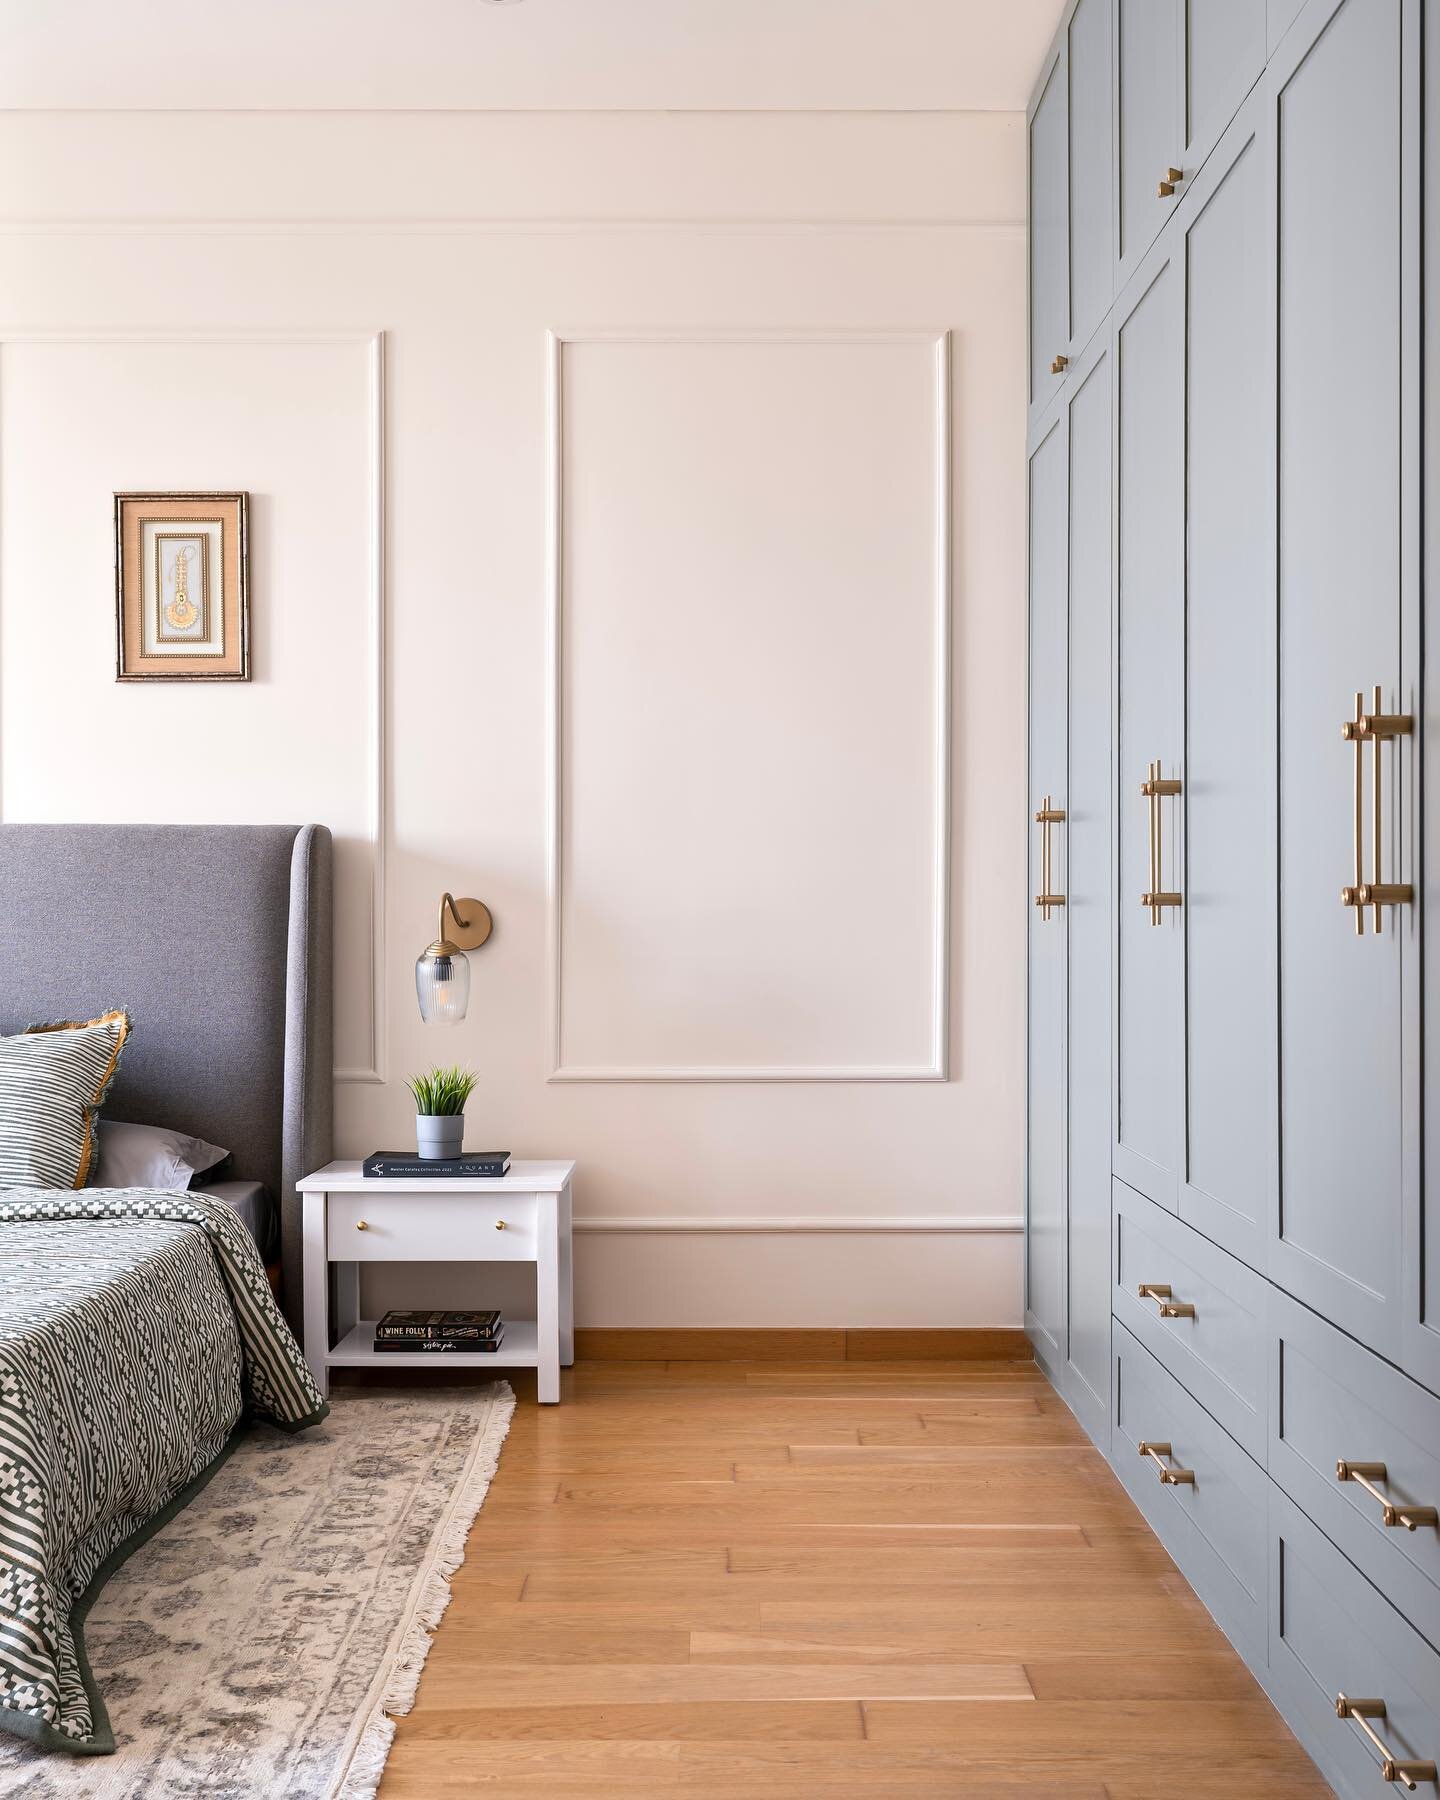 - details - from the grandmothers bedroom!

The wainscoting detail nods to the charm of an era bygone, while the upholstered teak and fabric bed adds a touch of modern plushness. A muted contrast between white, warm grey, and deep green energise the 